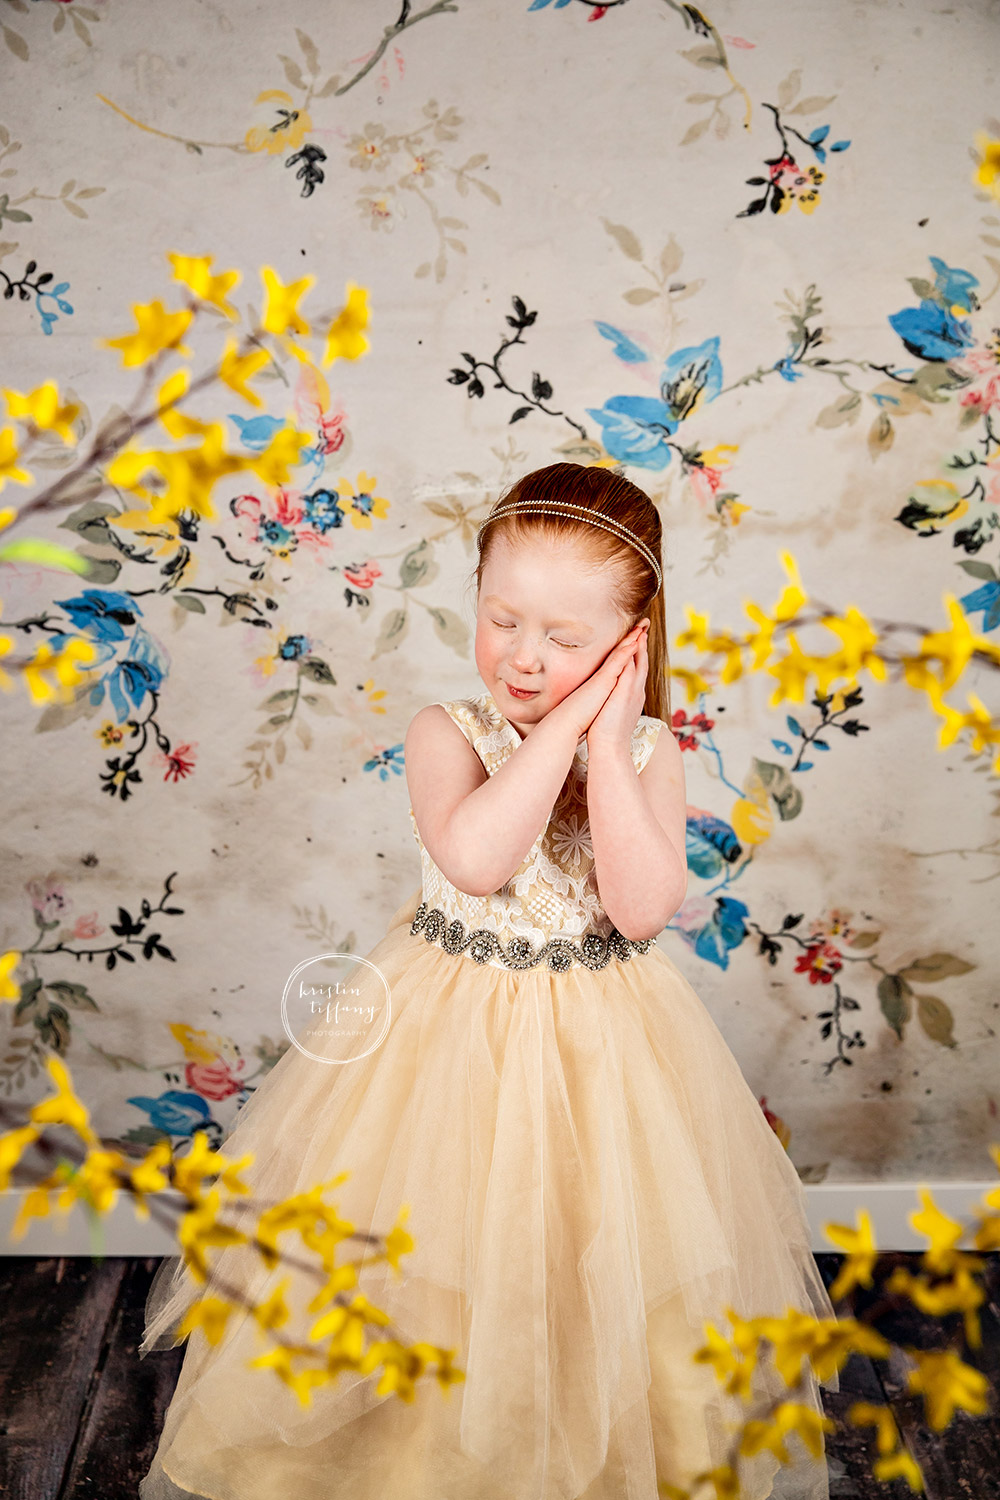 a photo from a kids photoshoot with Kristin Tiffany Photography